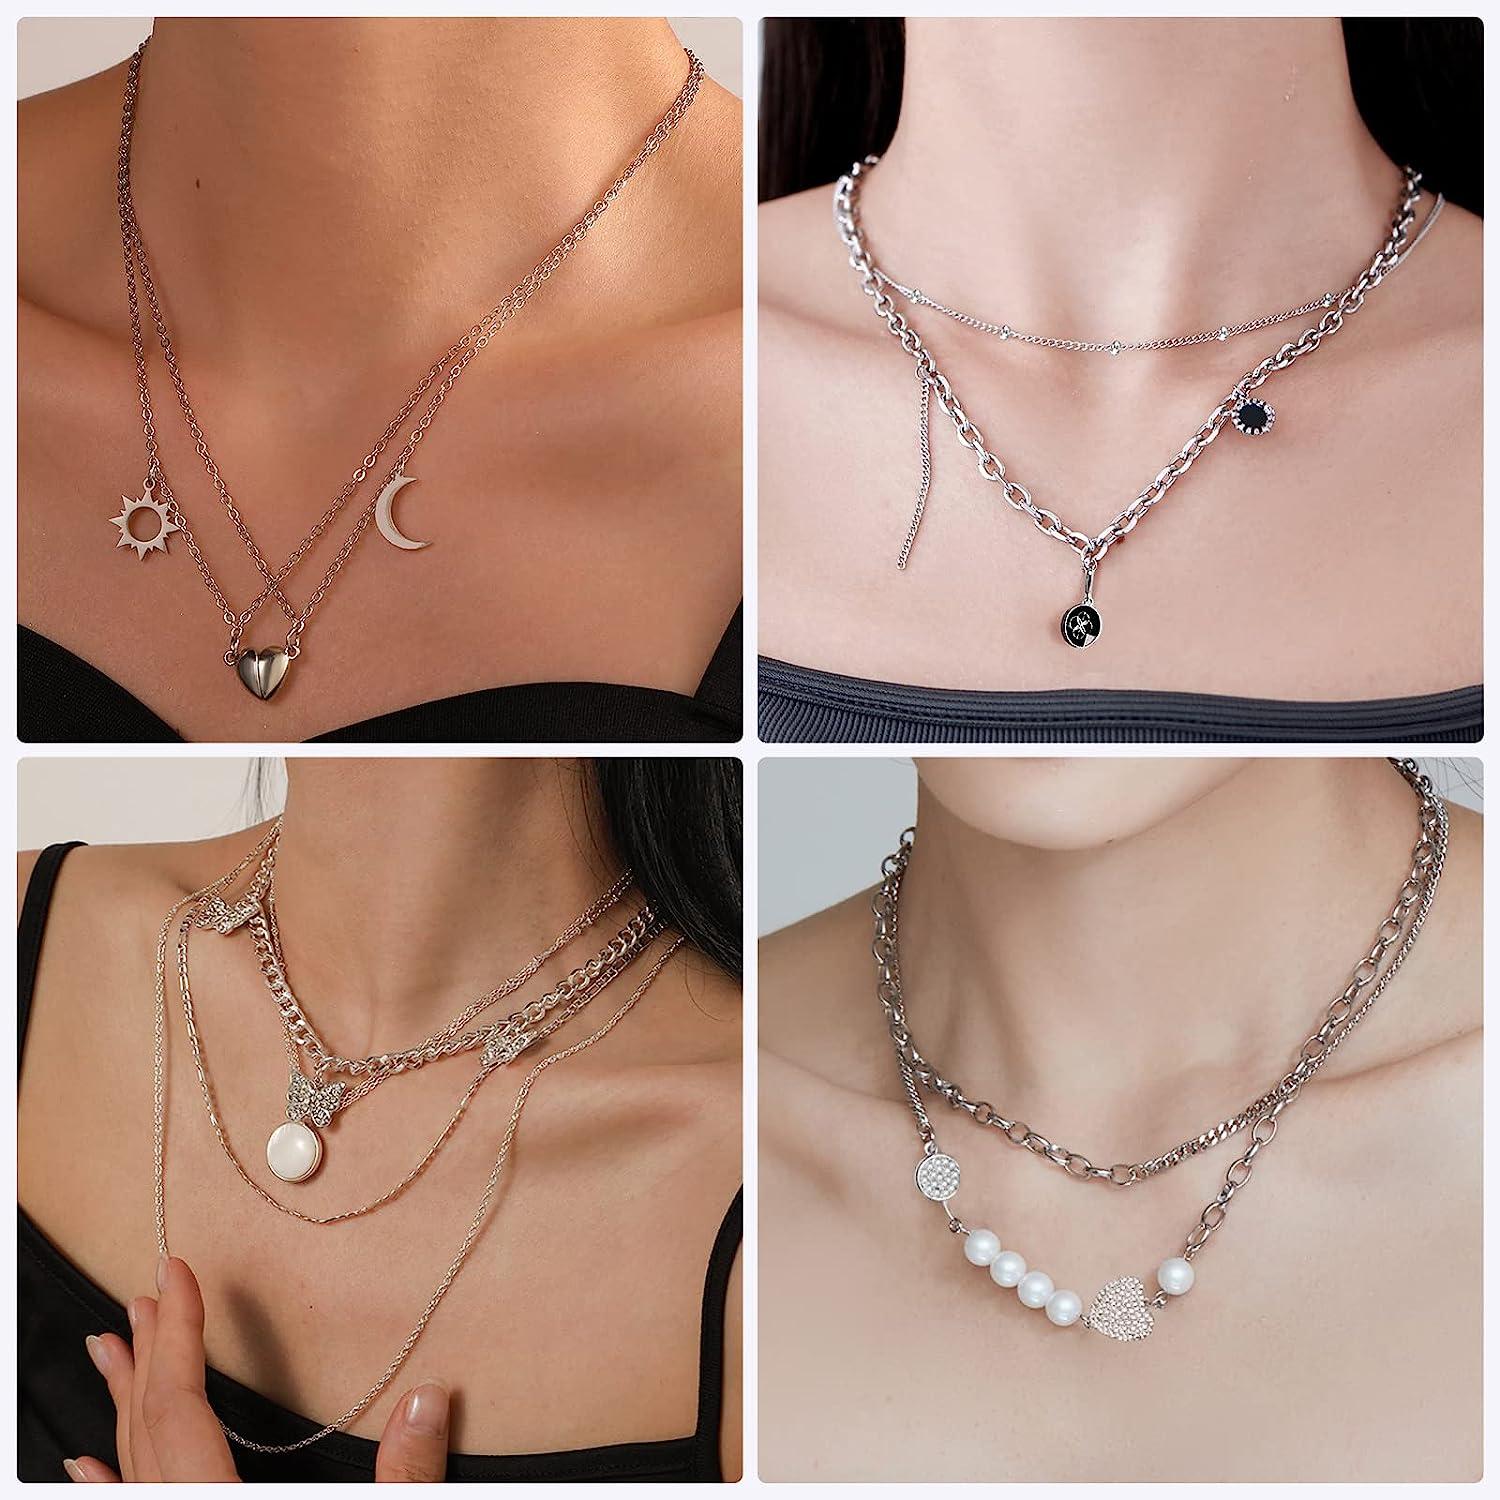 Bracelet Chains Jewelry Making  Silver Chain Making Jewelry